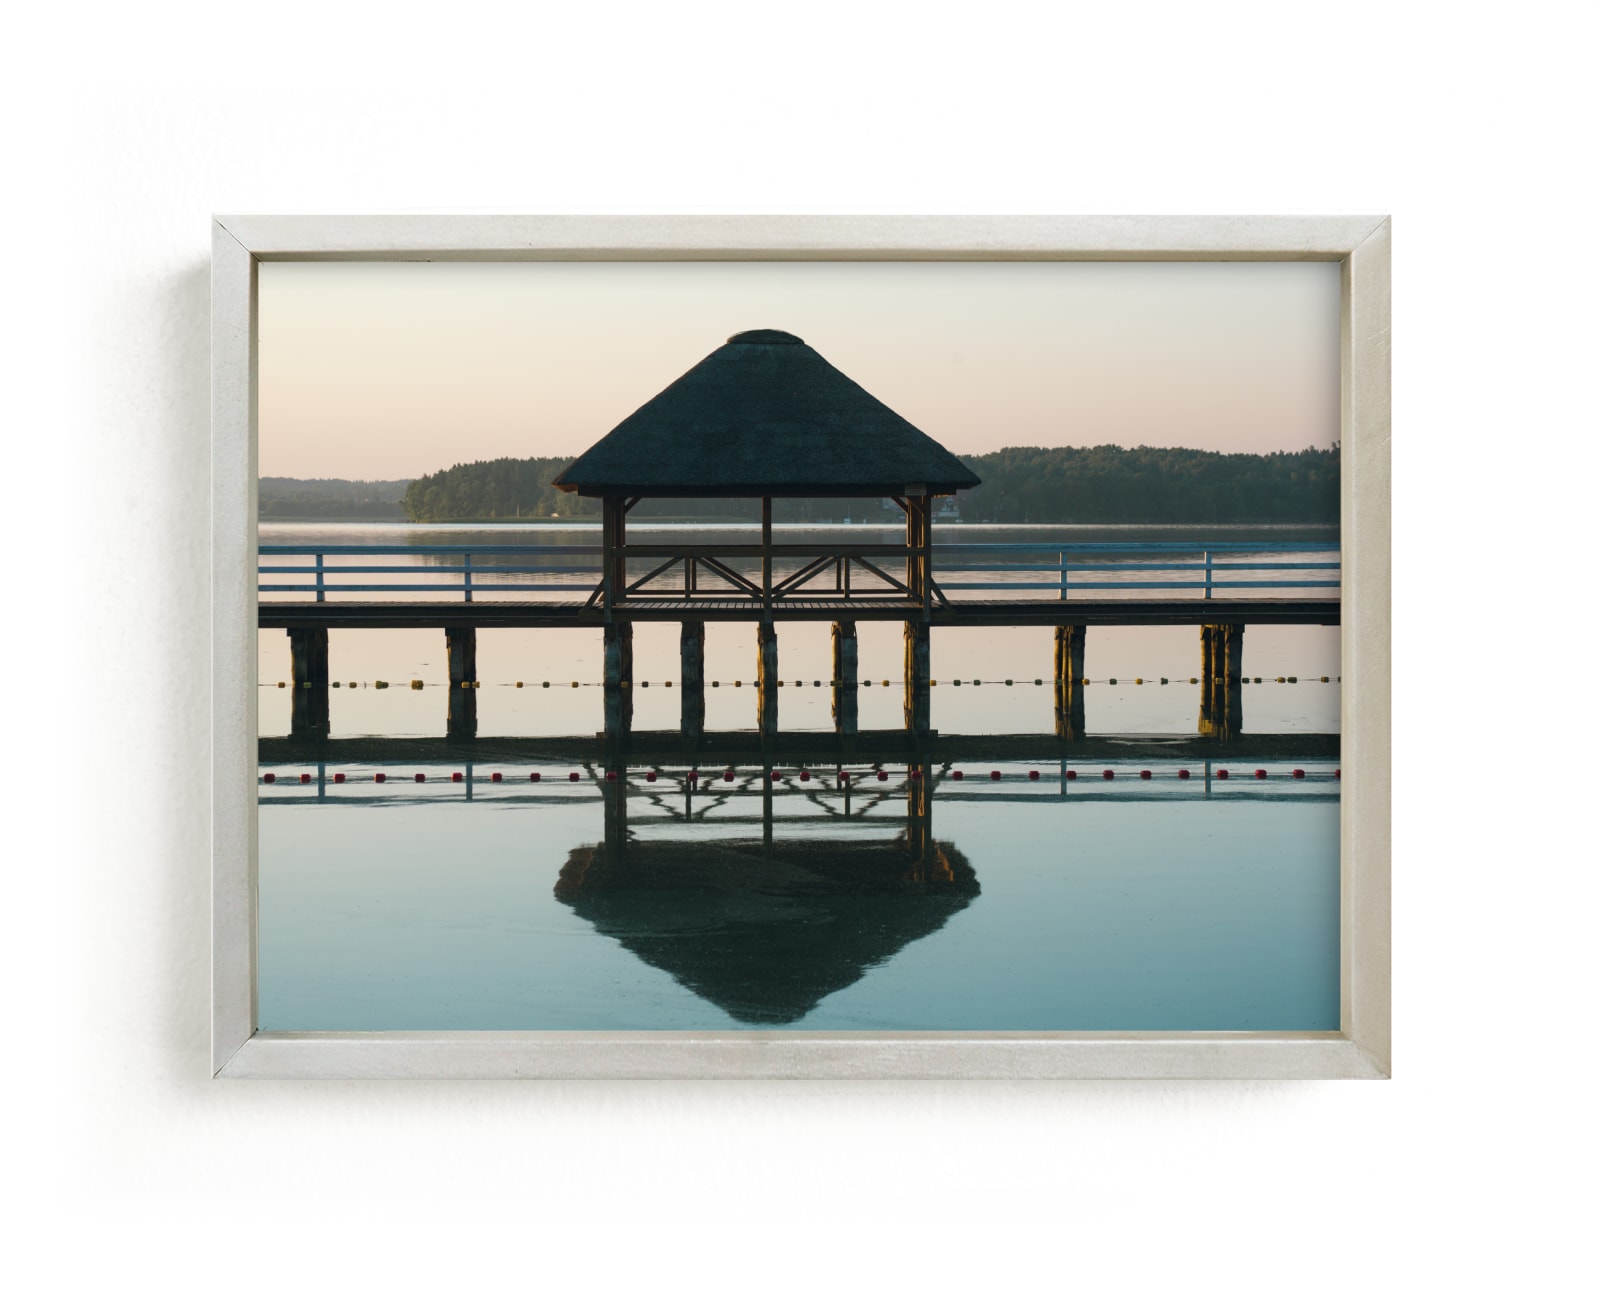 "Sunrise on the lake" by Lying on the grass in beautiful frame options and a variety of sizes.